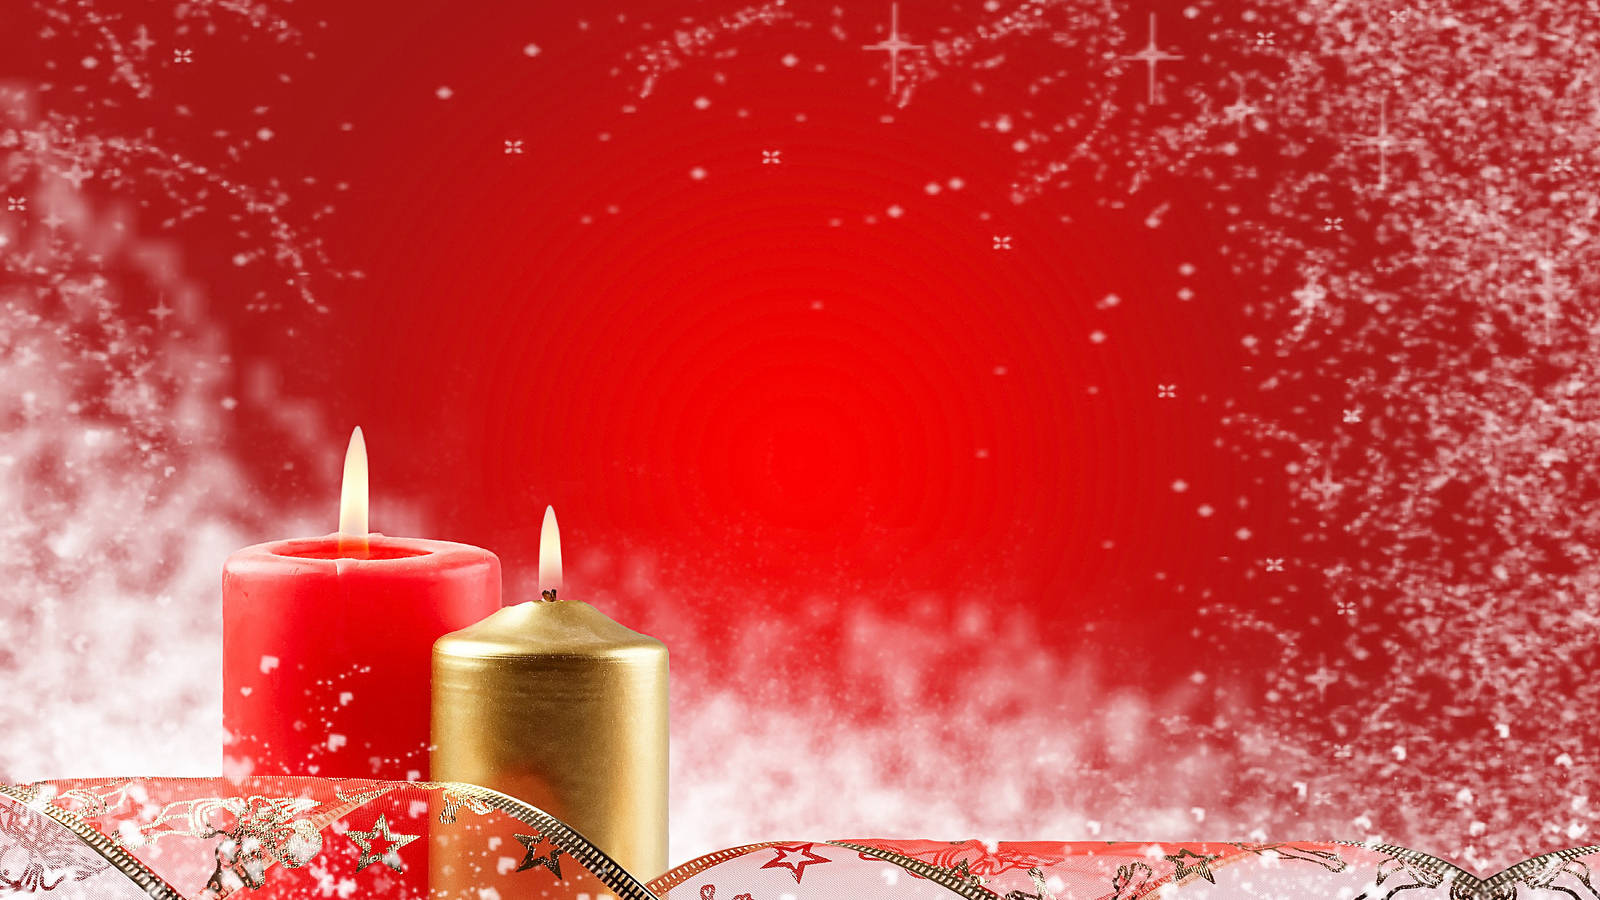 Candles On Red Christmas Background Wallpaper